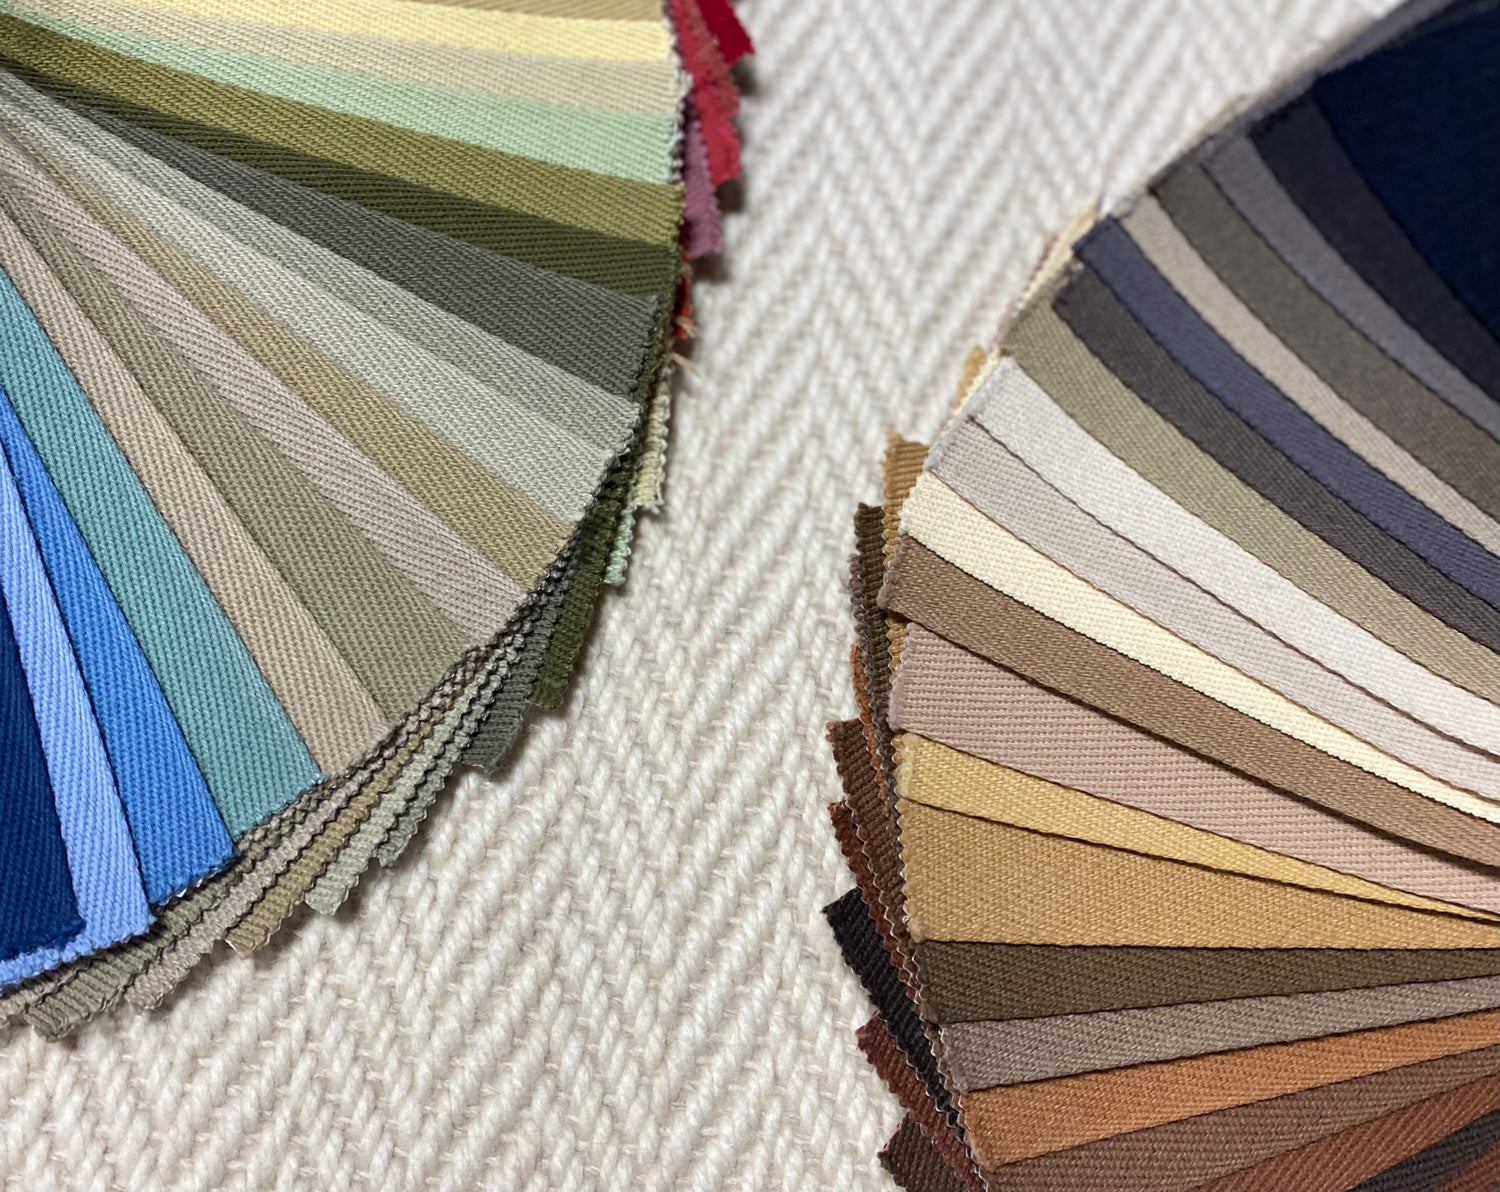 Turn Your Carpet Into a Rug: Carpet Binding & Accessorizing Options - The  Carpet Workroom